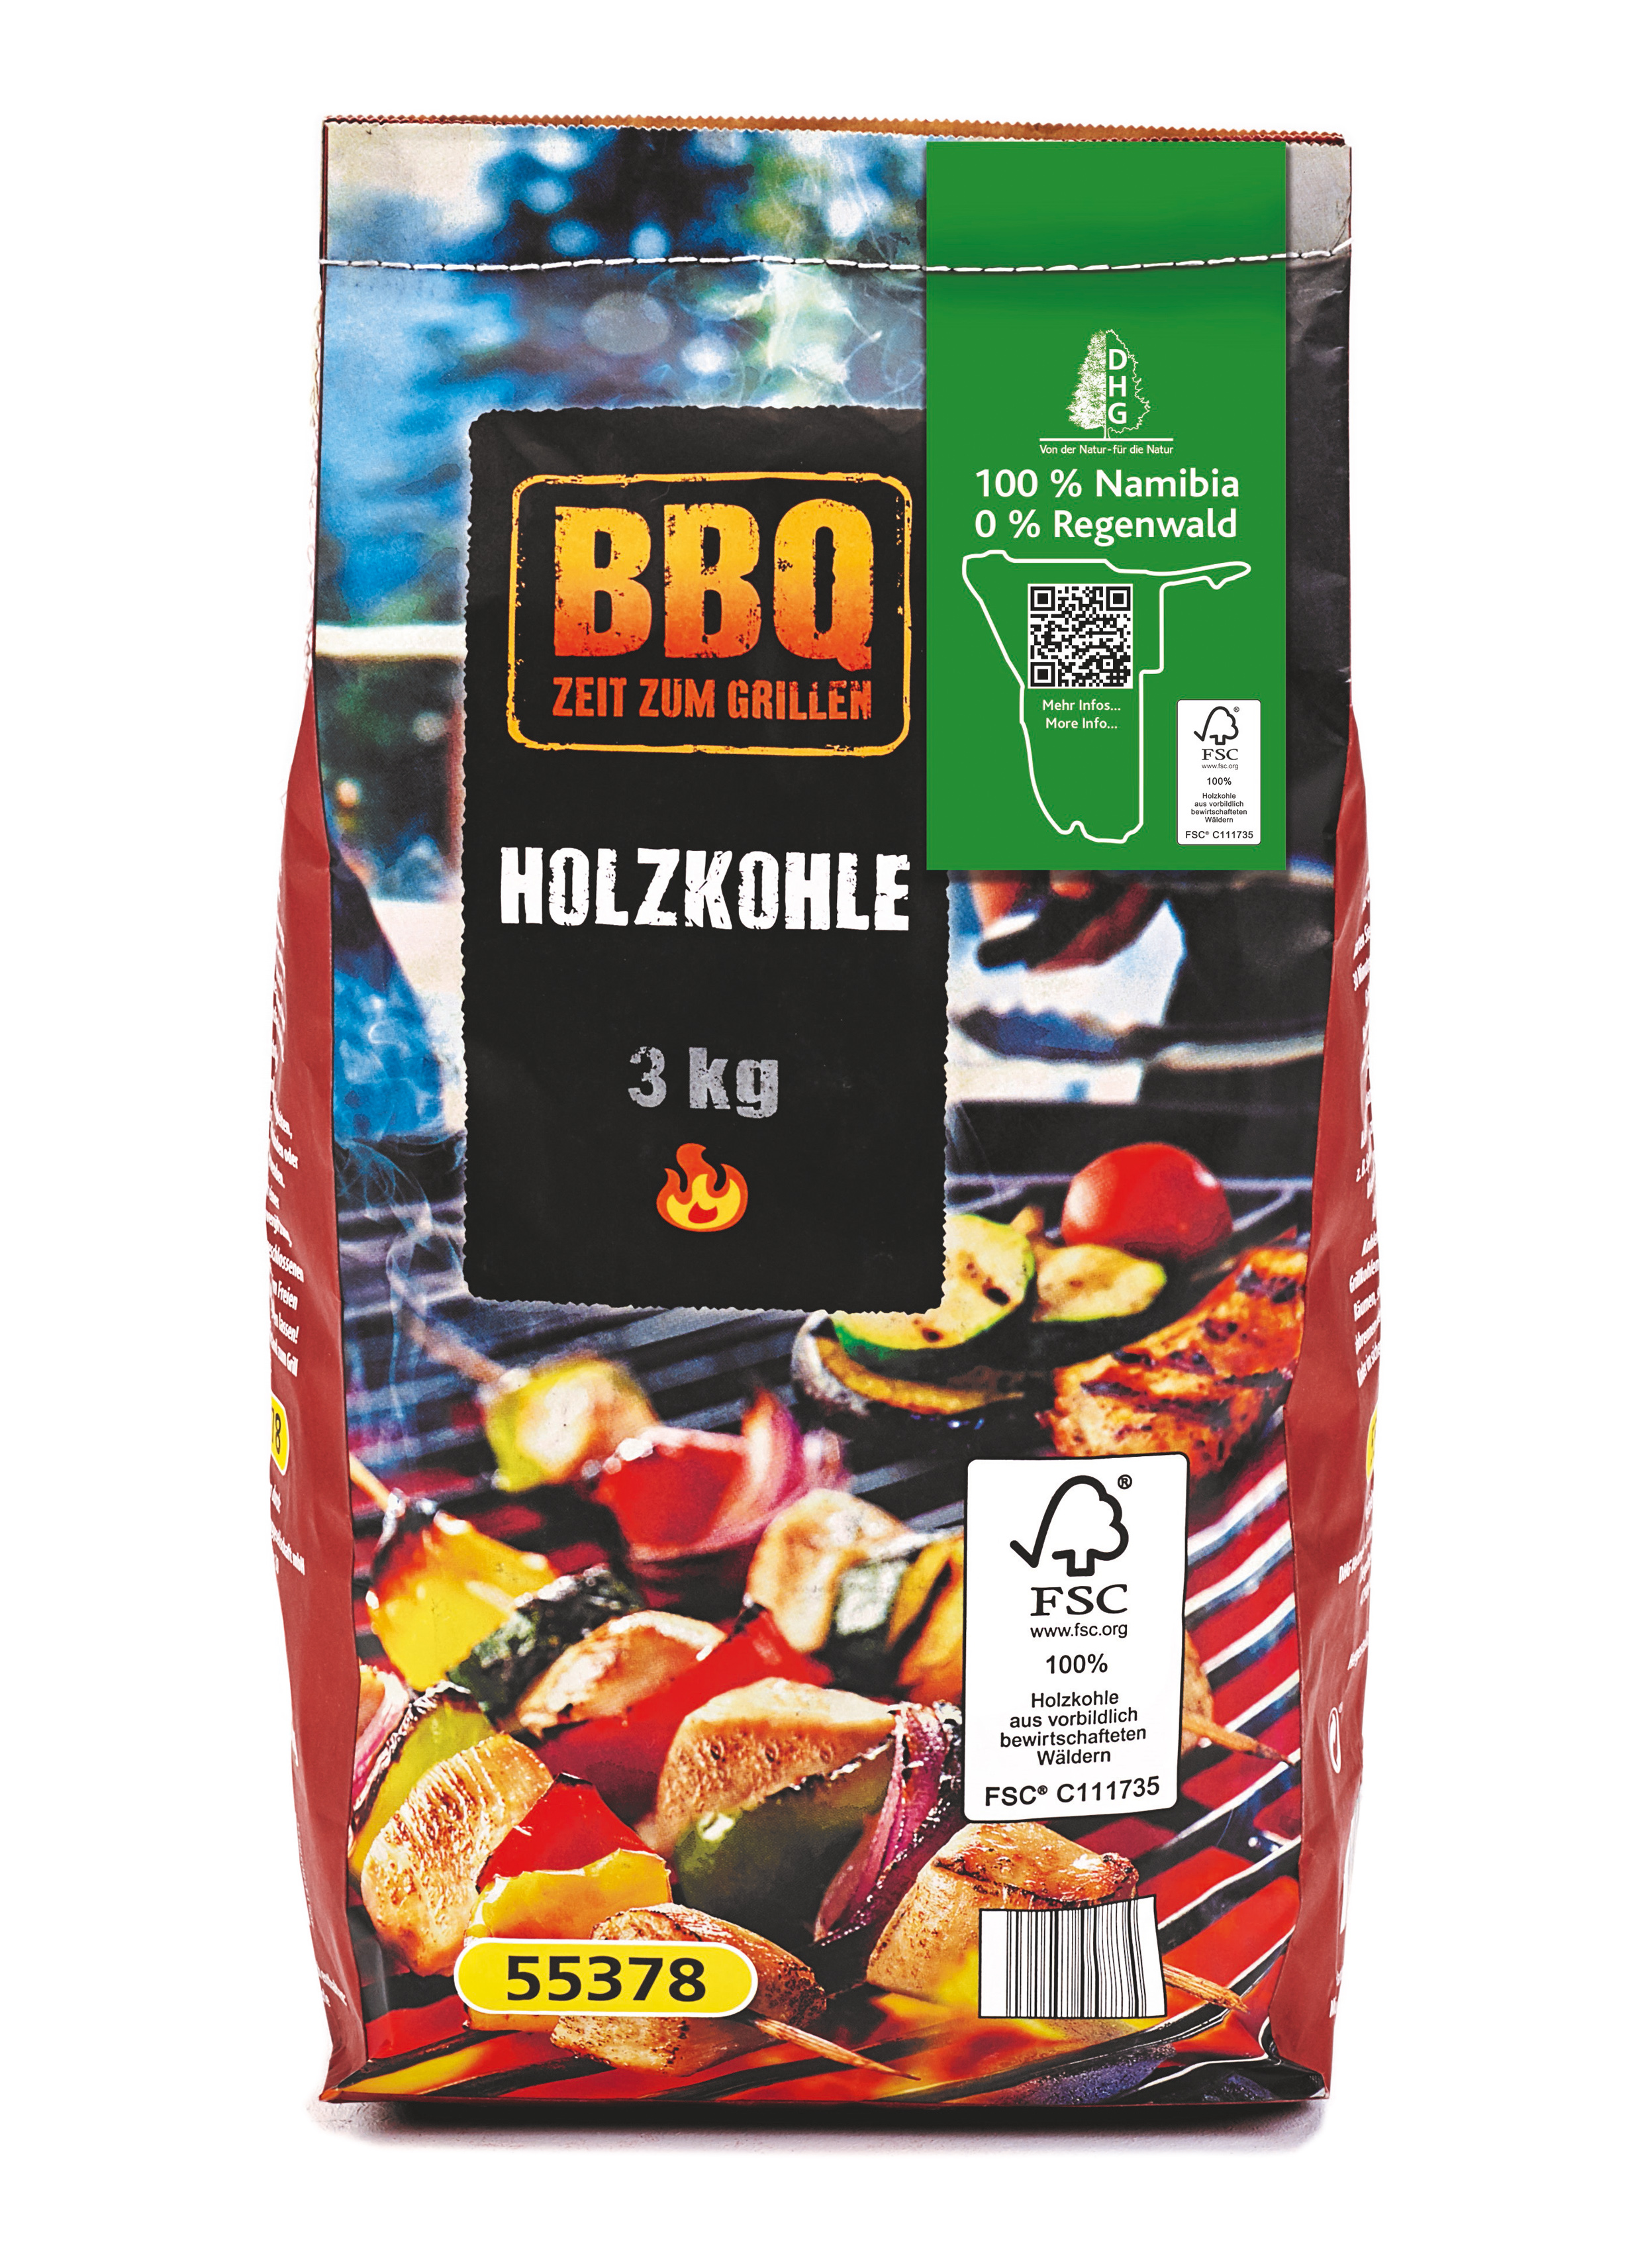 ALDI SOUTH Sustainable Namibian Charcoal